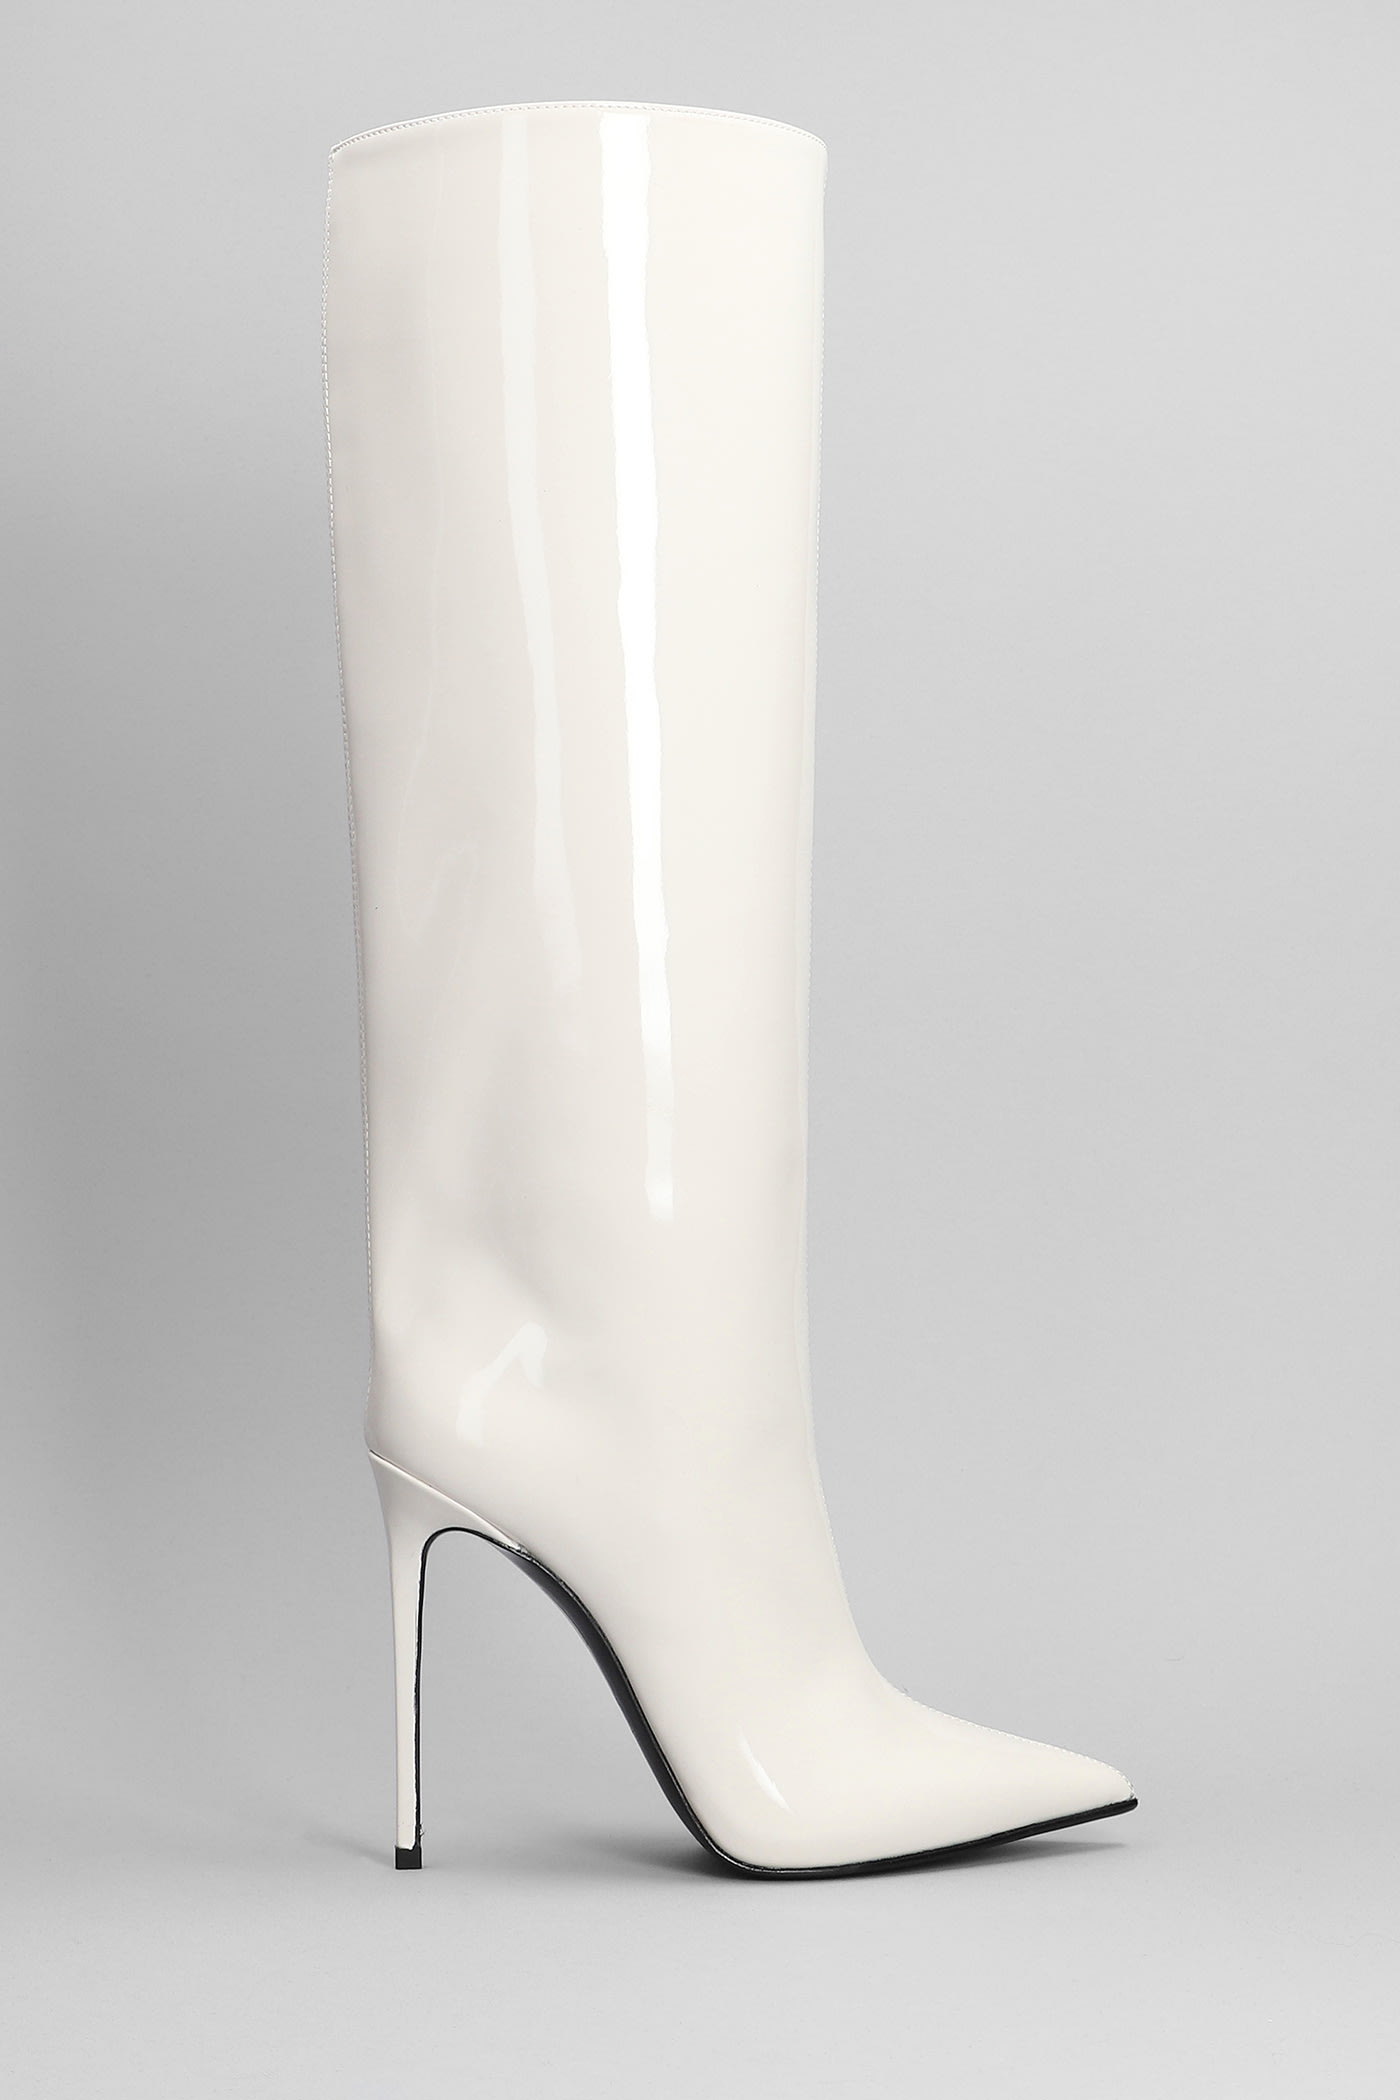 Eva 120 High Heels Boots In Beige Patent Leather